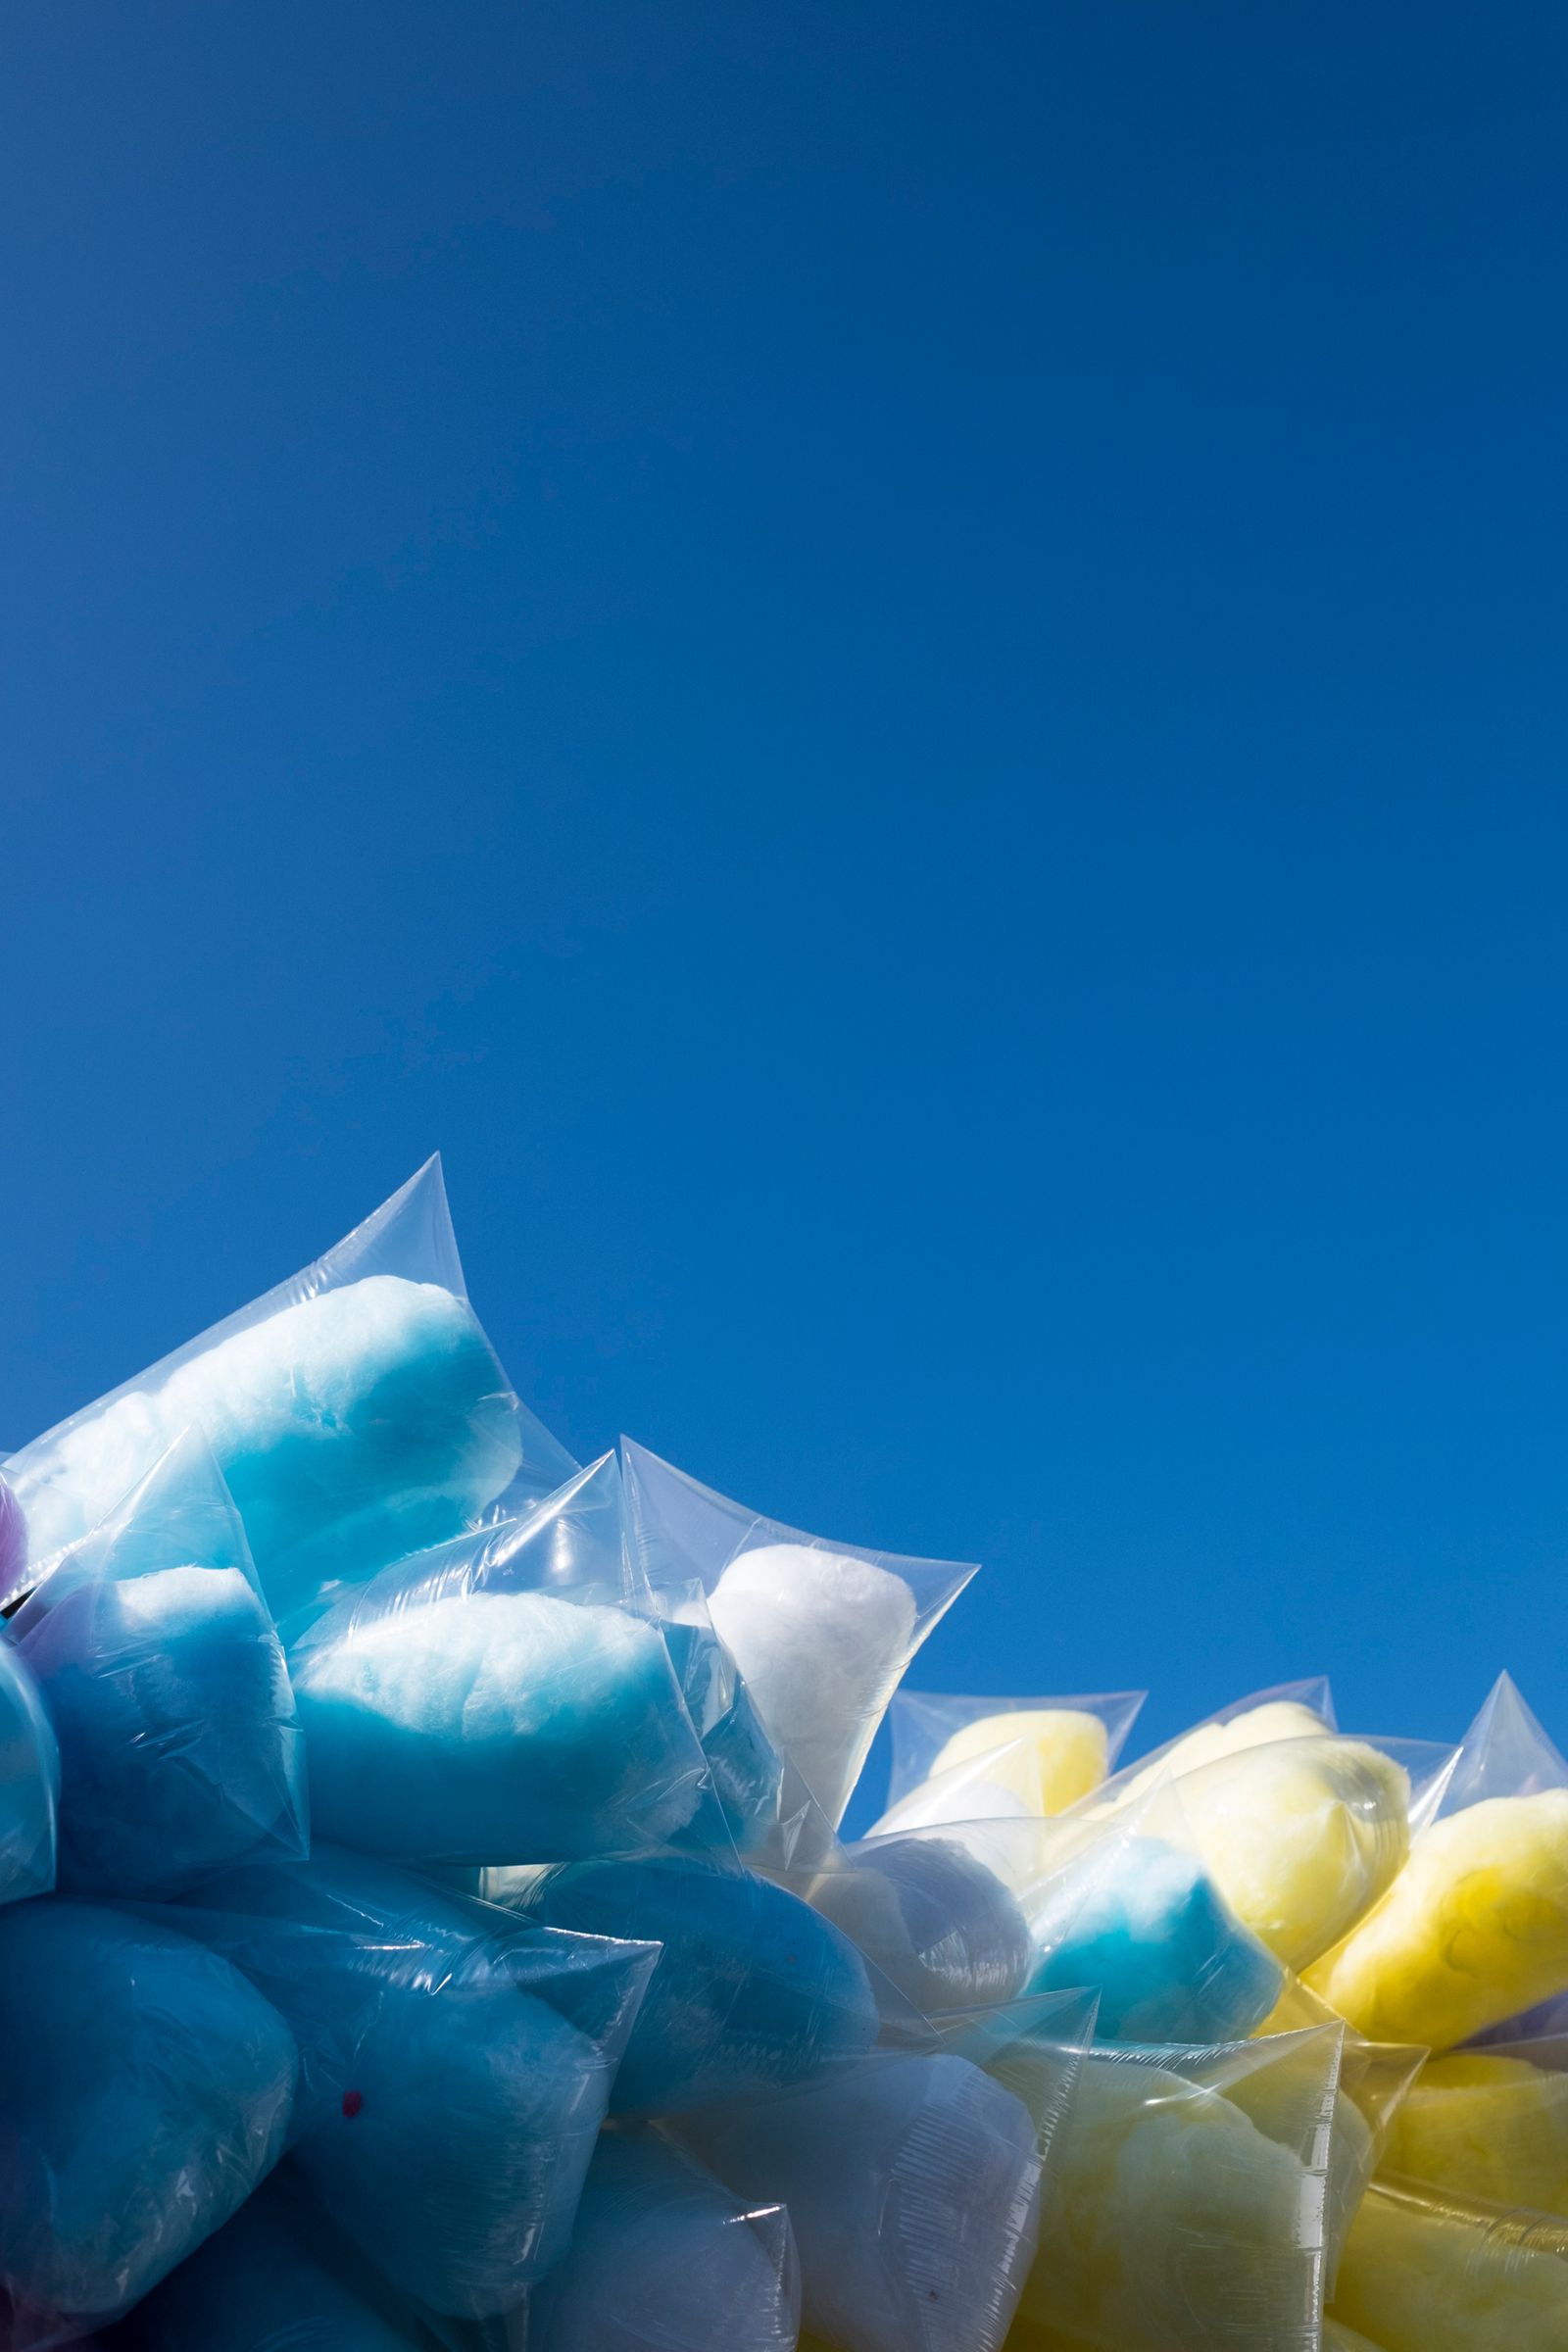 © Cris Veit - Clouds of cotton candy wrapped in plastic bags are set up against the beautiful blue sky of lake Atitlán